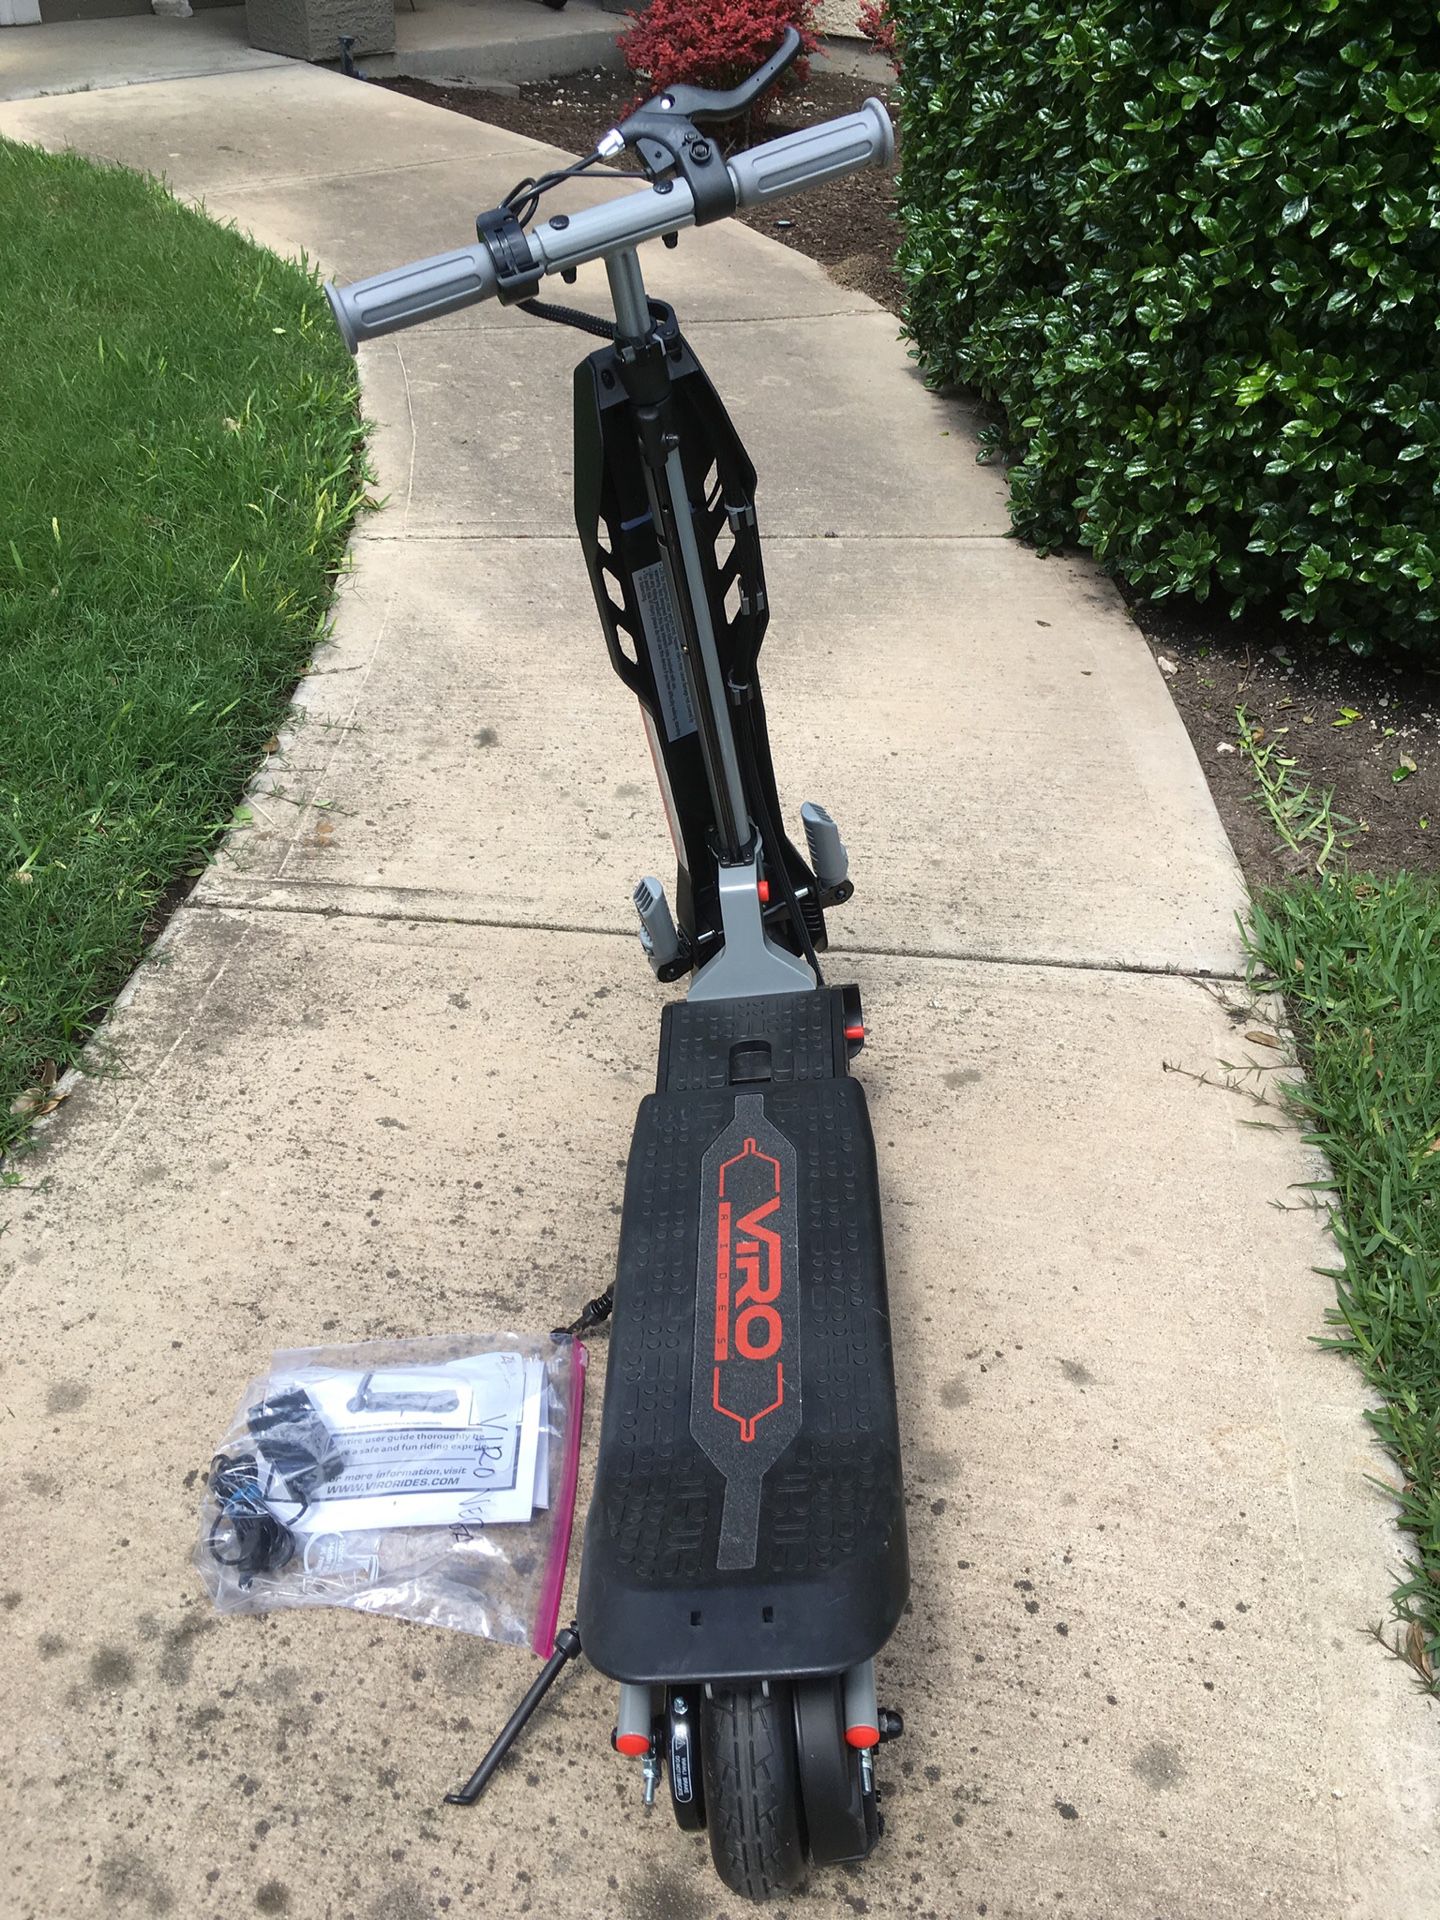 Viro Vega electric scooter and motorbike- excellent working condition w all parts